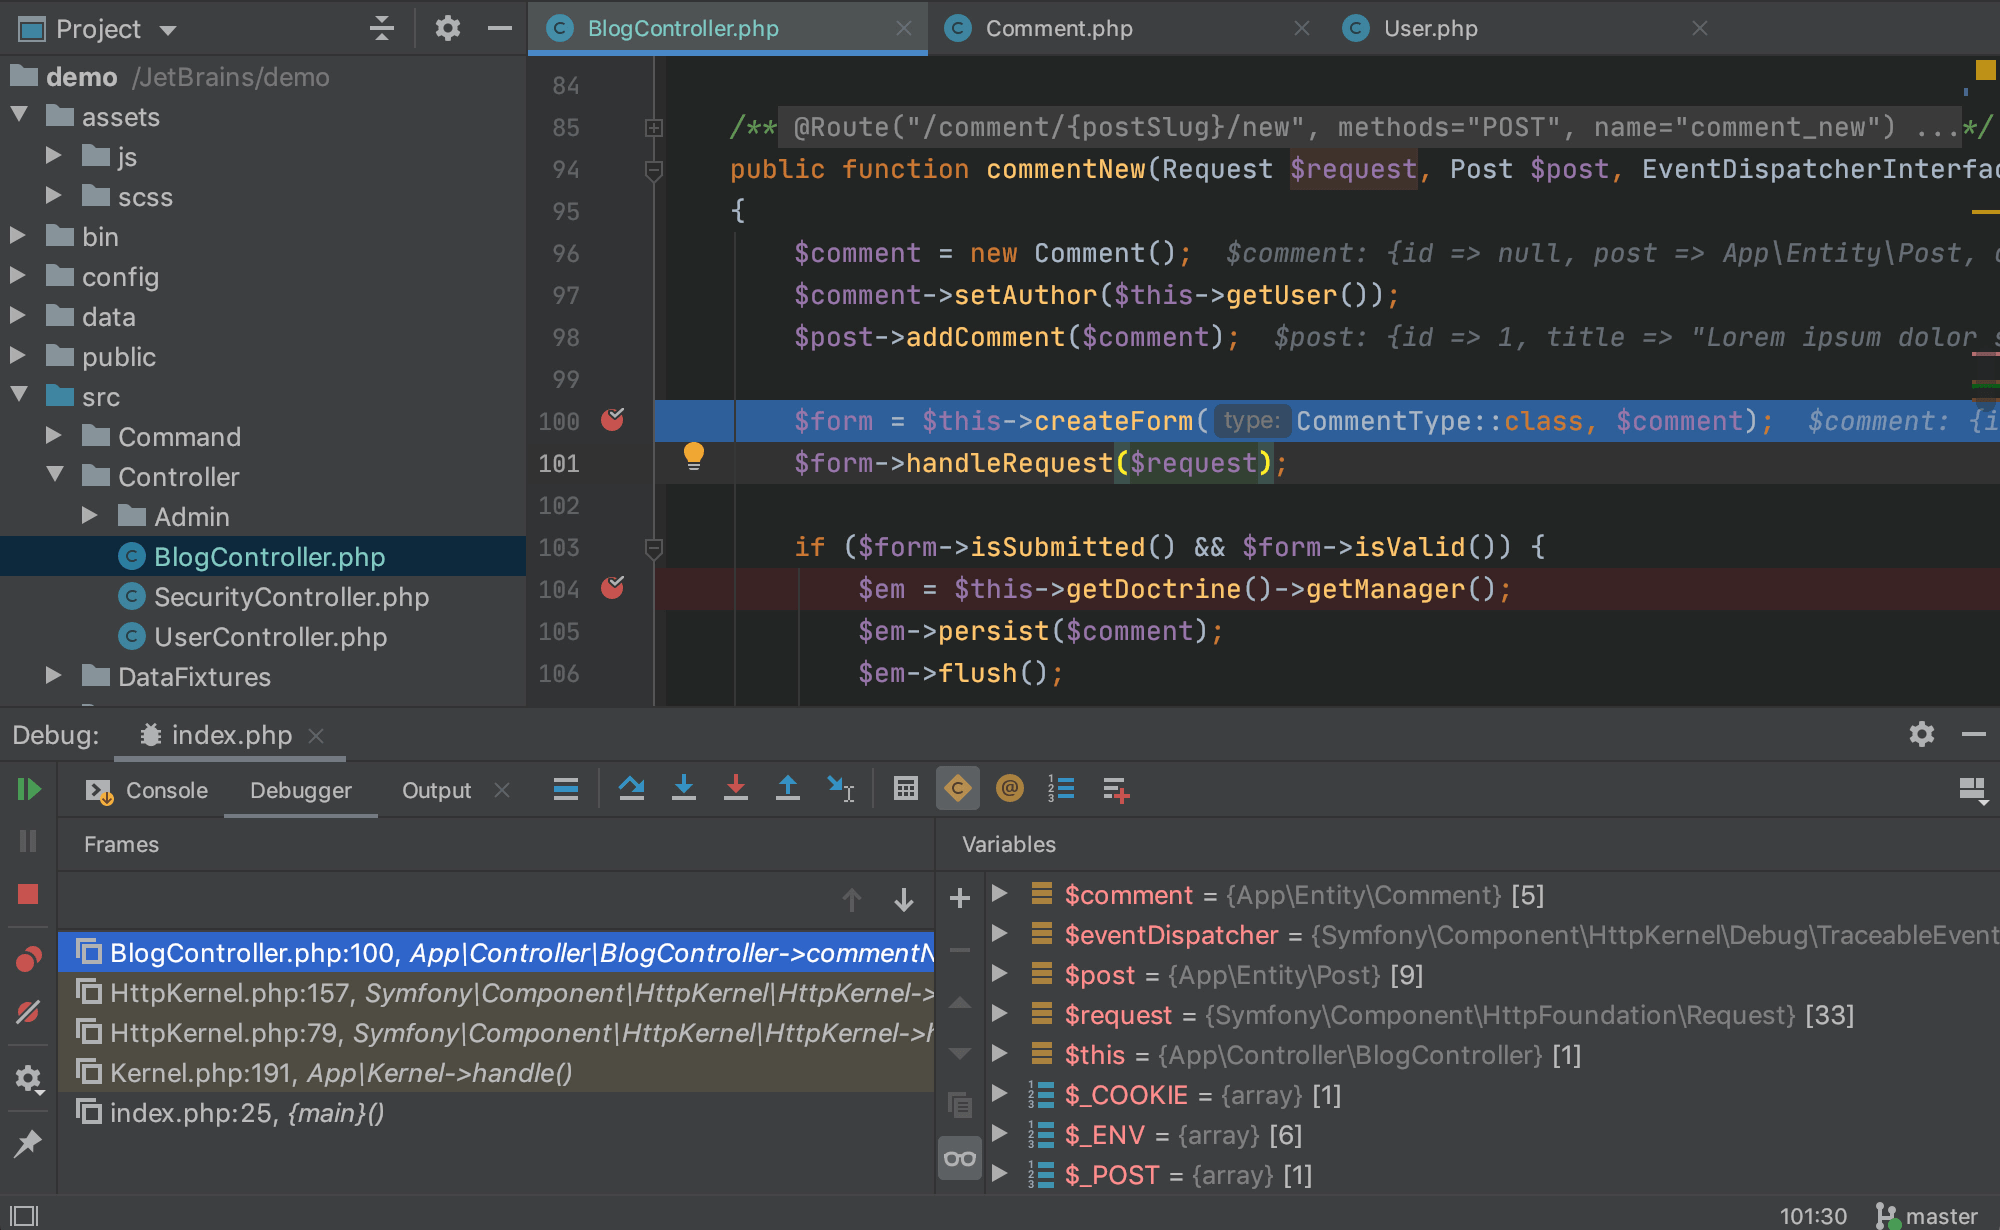 JetBrains PhpStorm 2023.1.3 download the new version for android